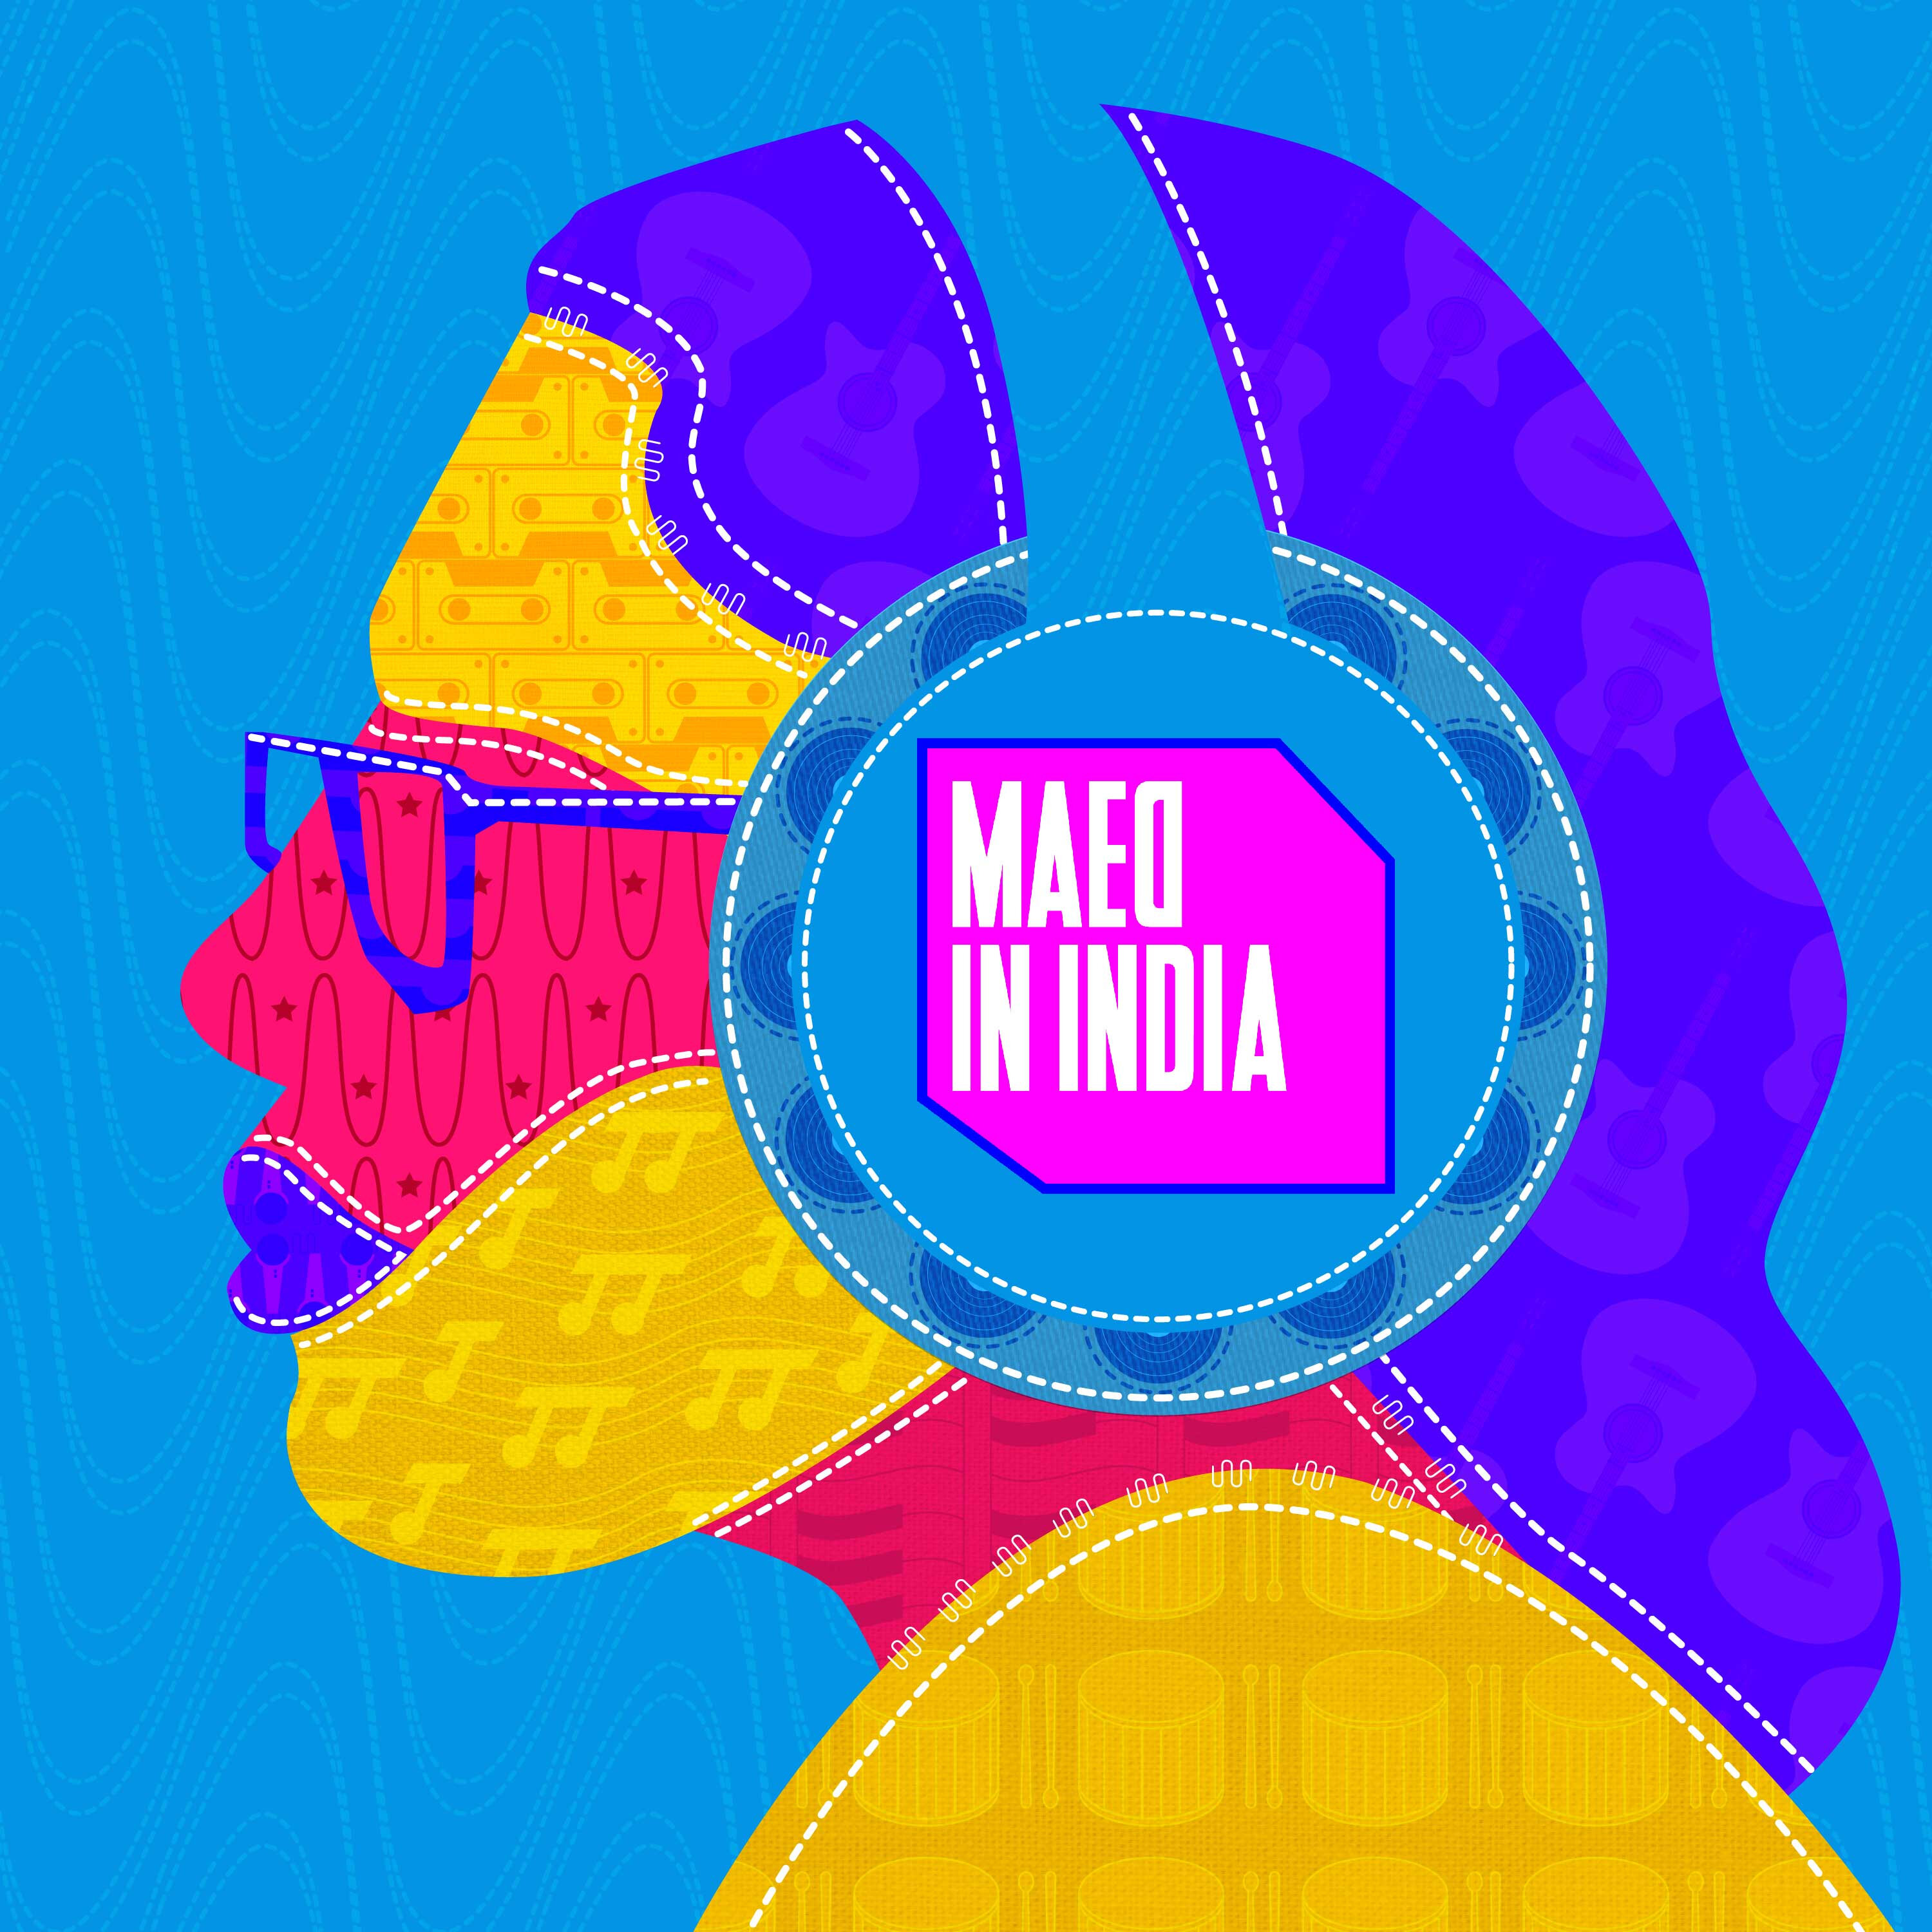 Maed in India:Maed in India